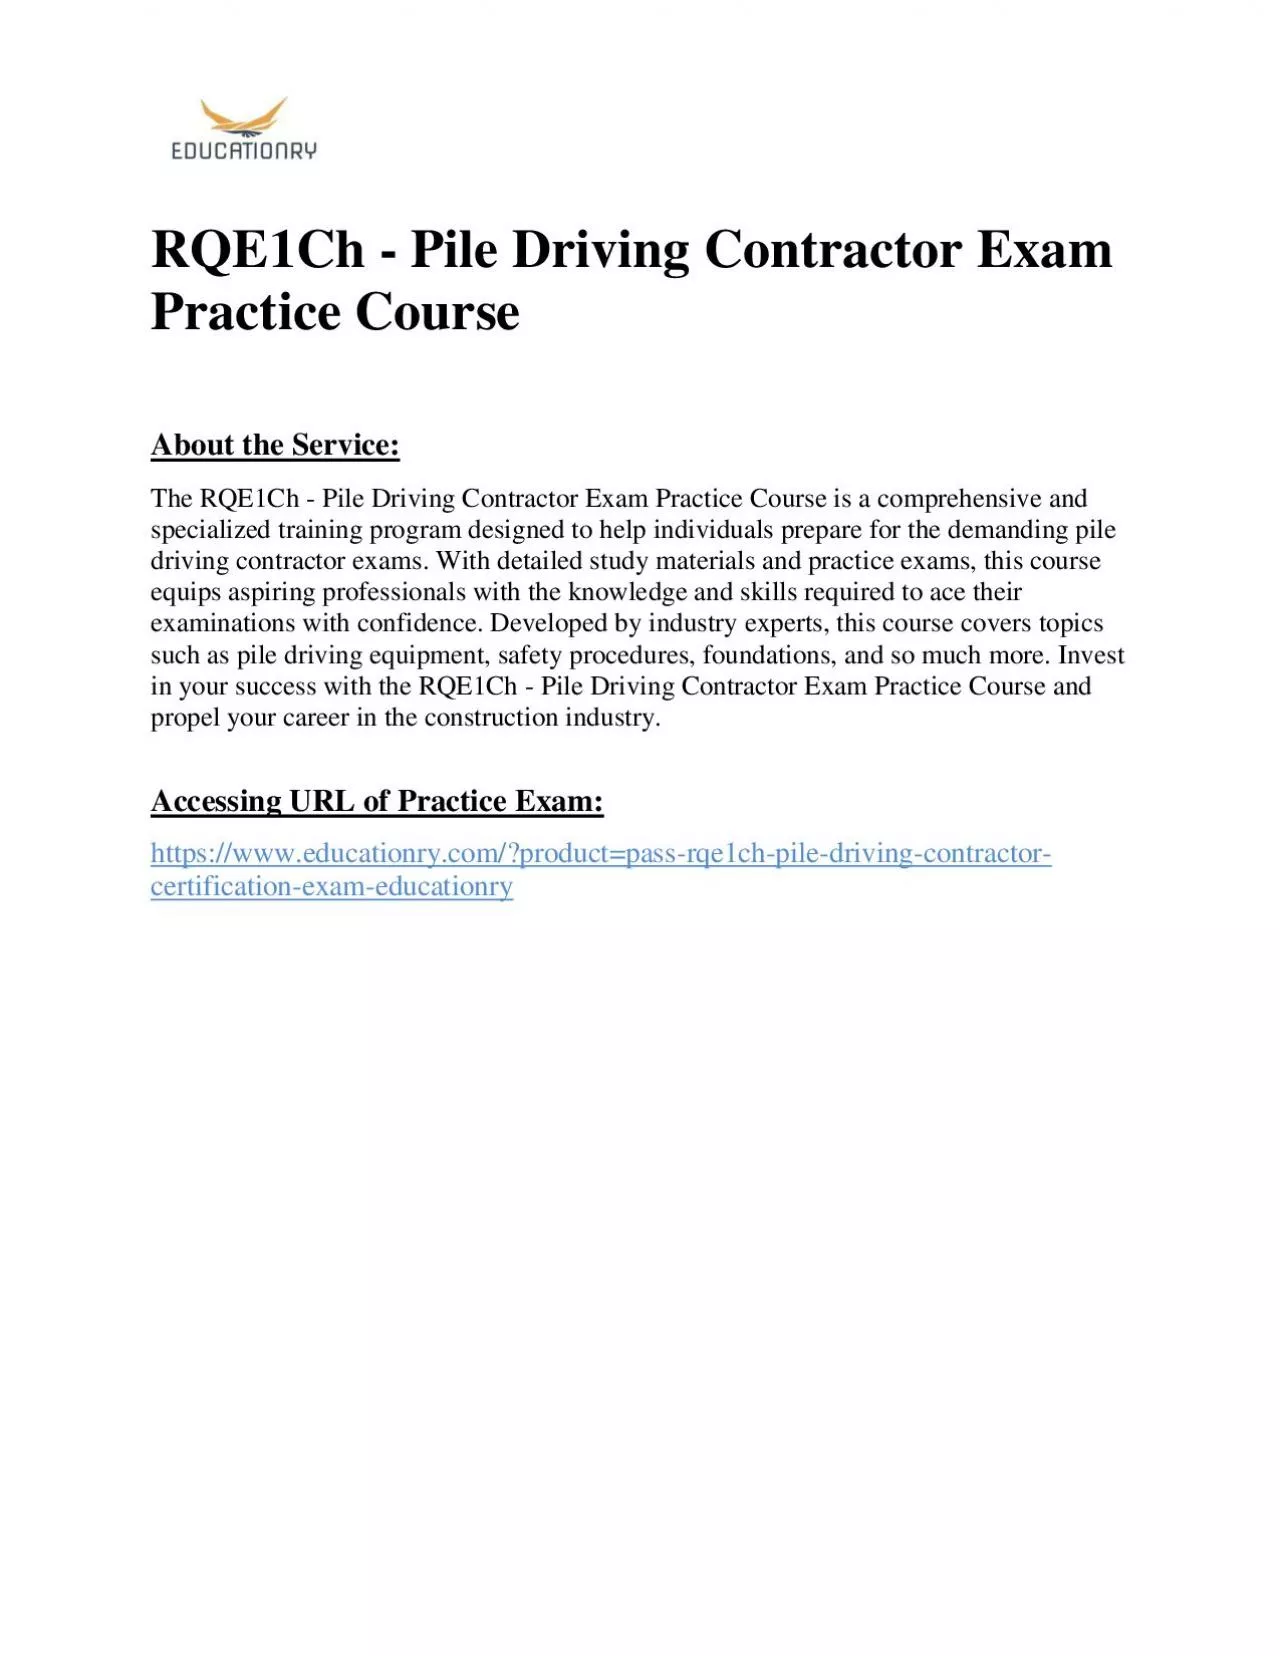 RQE1Ch - Pile Driving Contractor Exam Practice Course